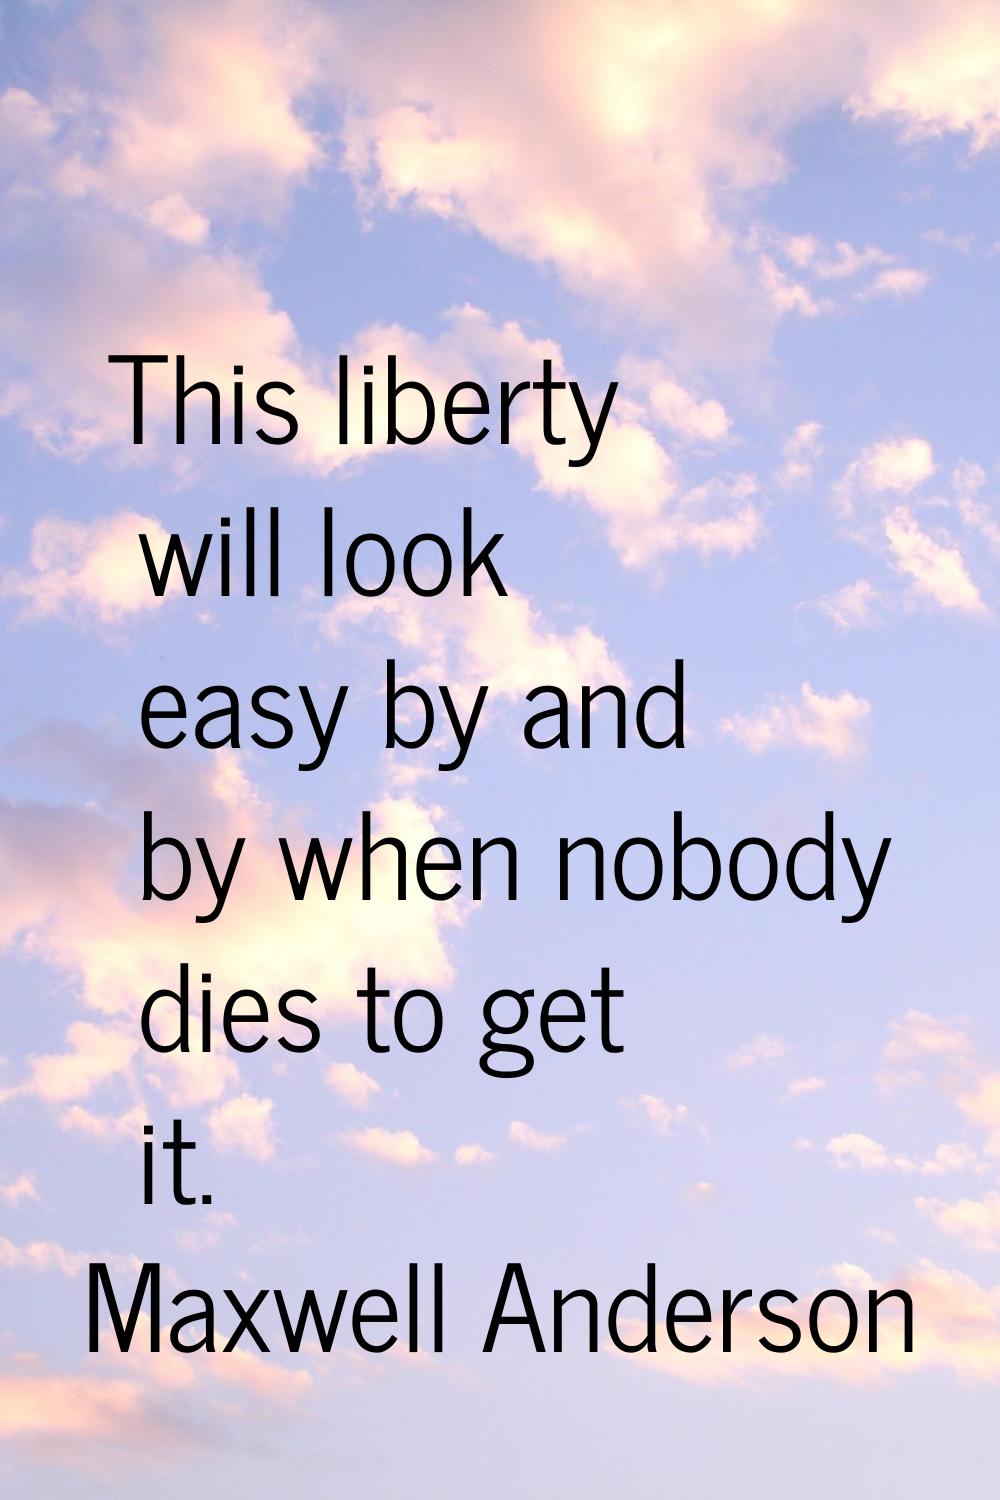 This liberty will look easy by and by when nobody dies to get it.